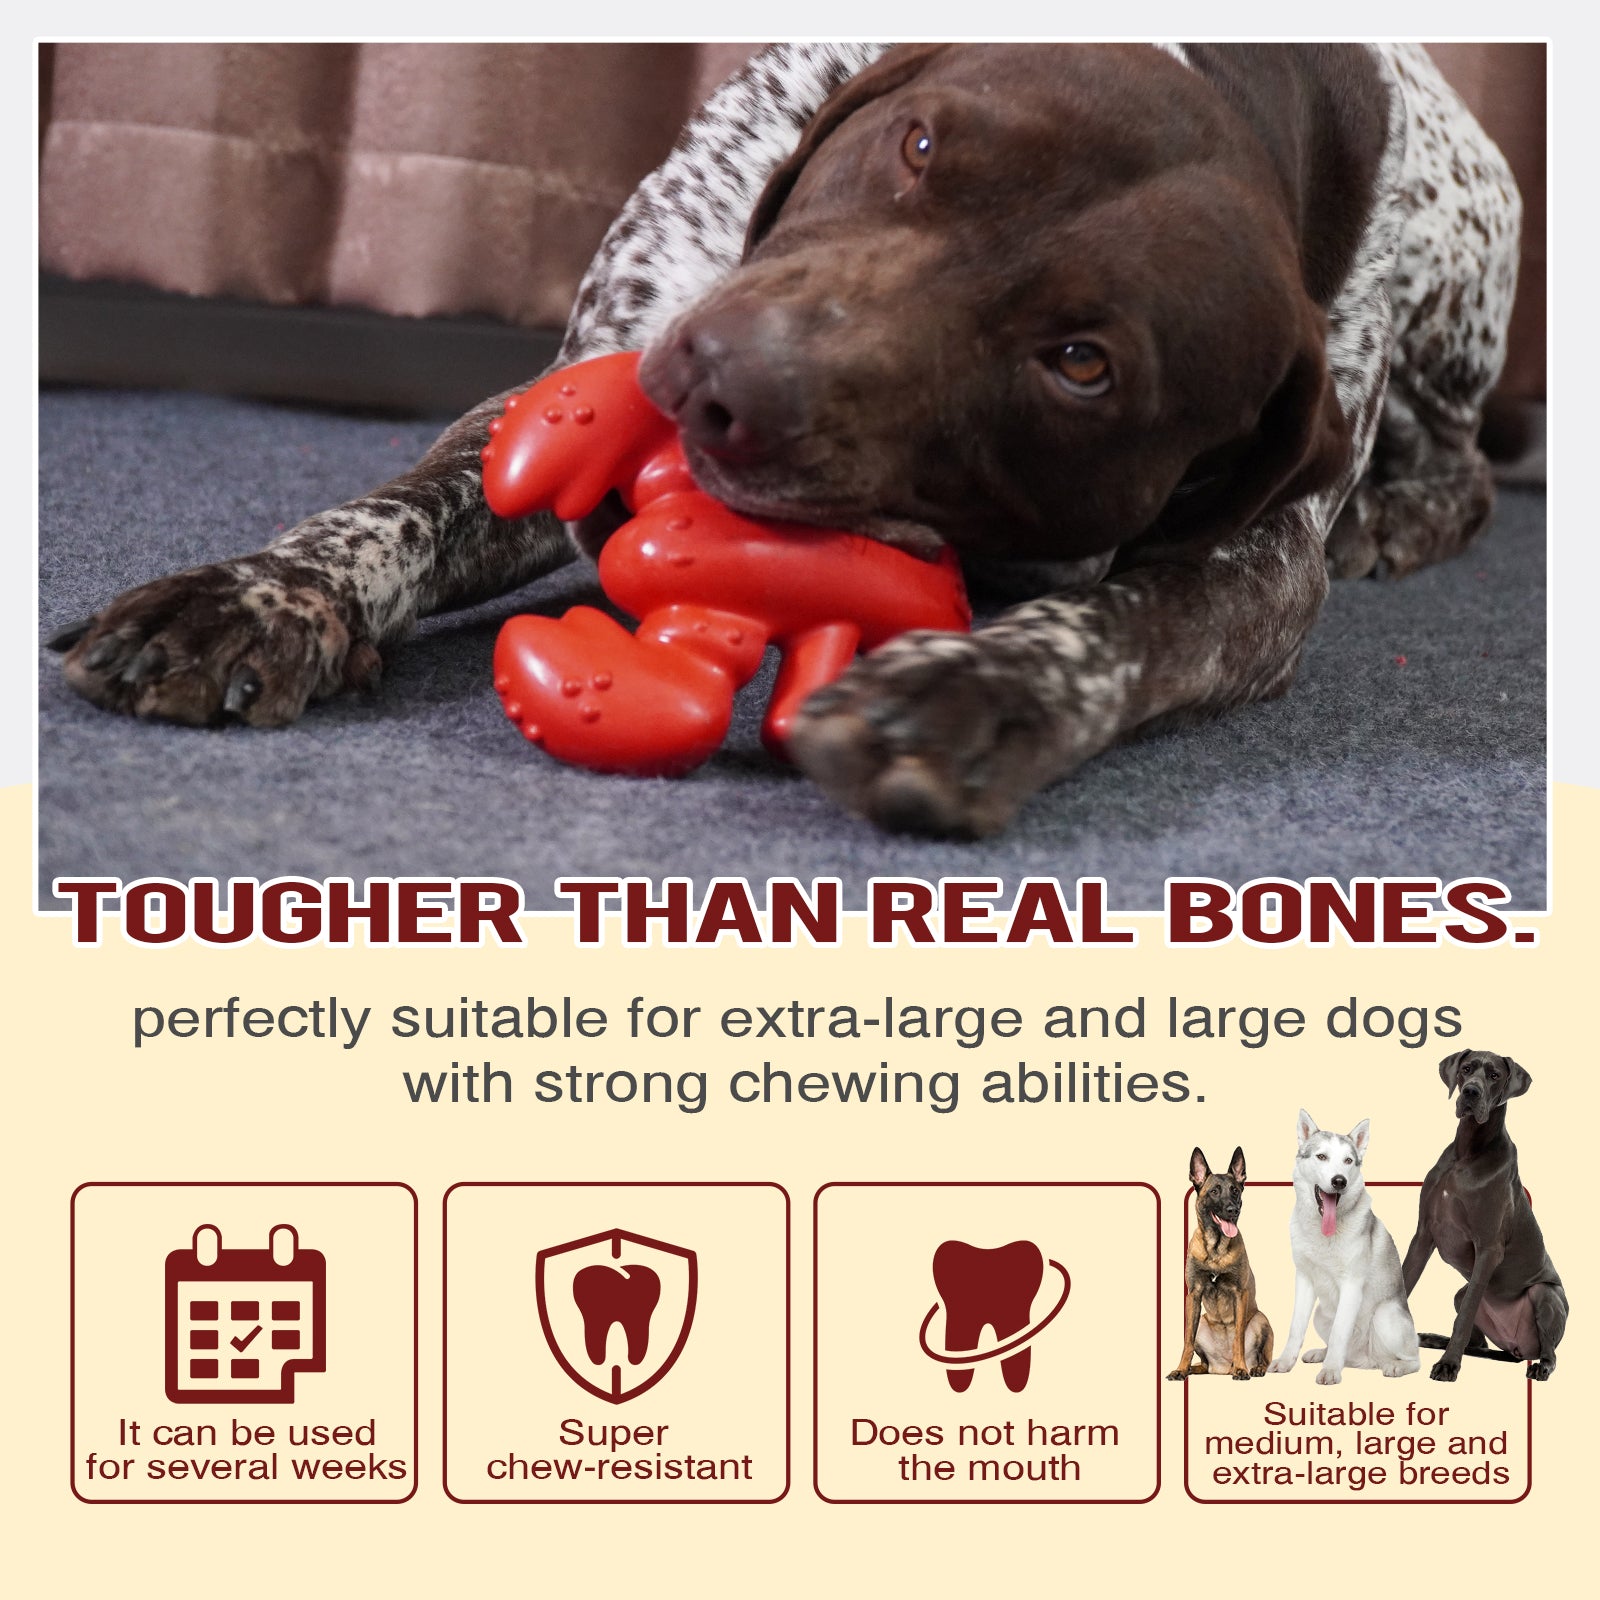 KADTC Dog Chew Toys for Aggressive Chewers Indestructible Tough Durable Interactive Puppy Toy Teeth Boston lobster Dog Chew Toy